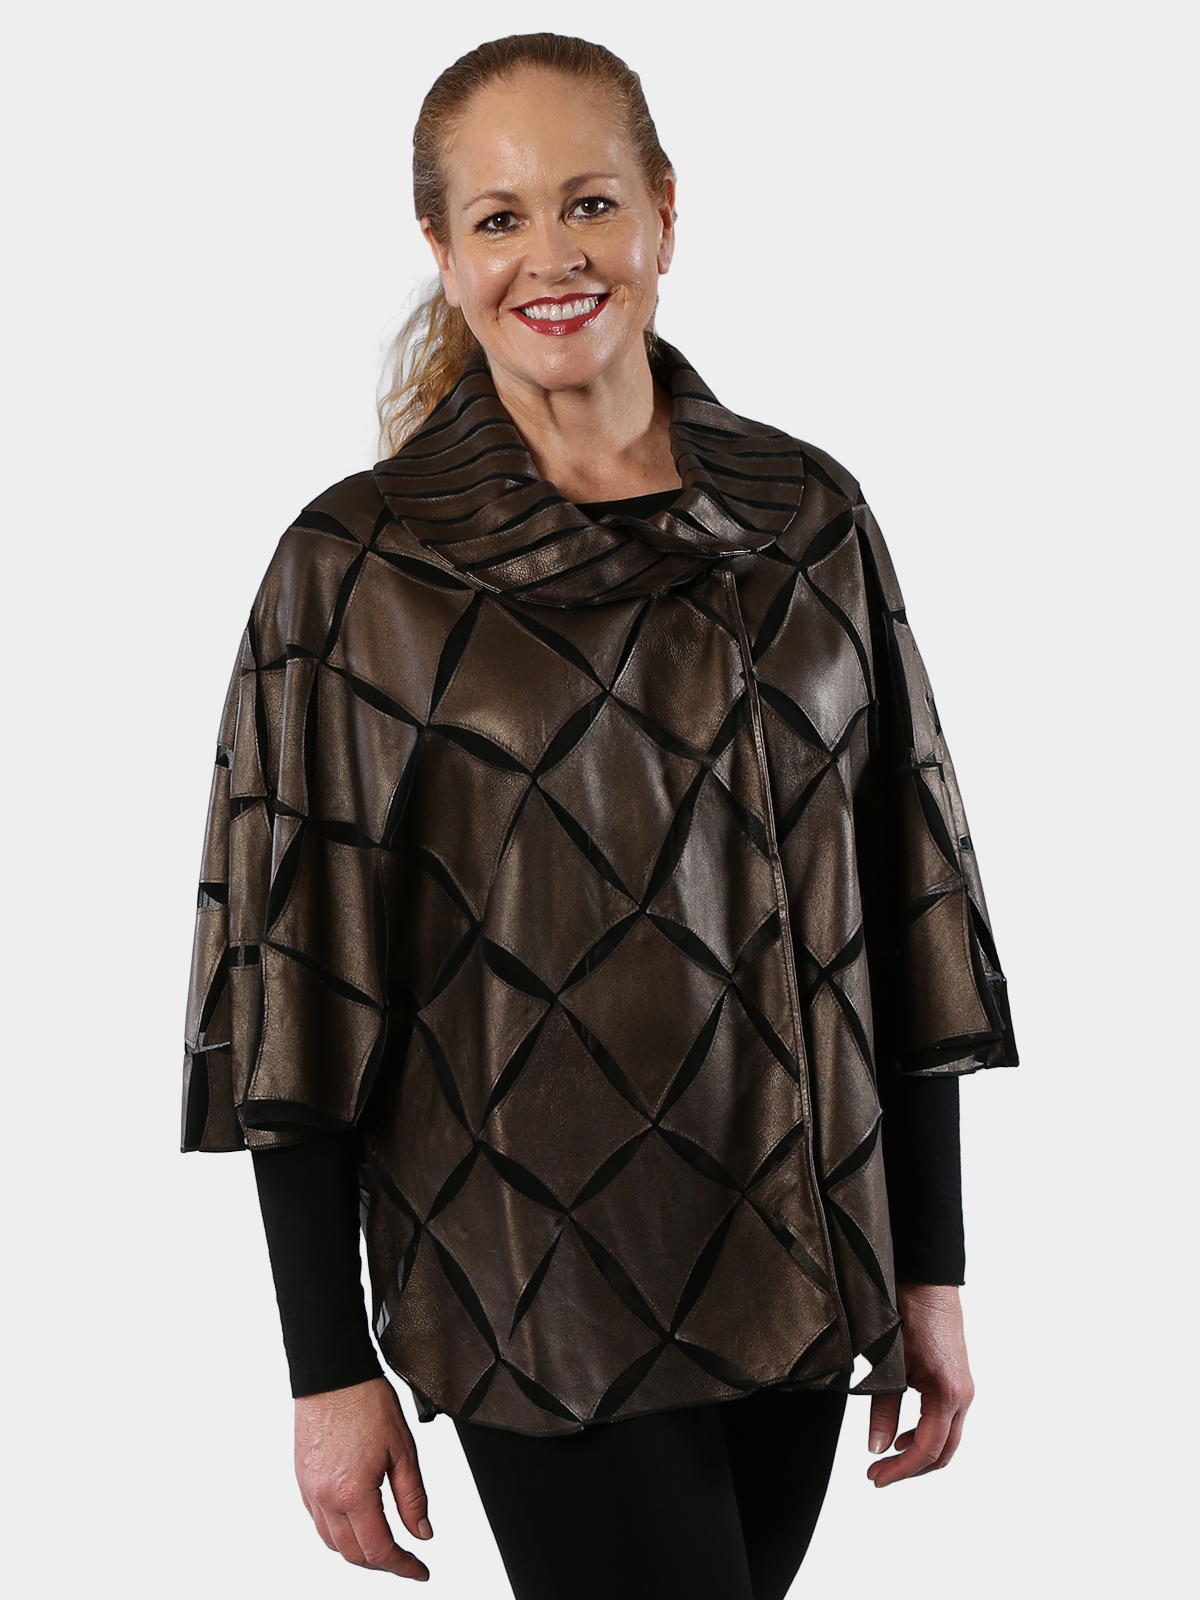 Woman's Bronze Leather and Black Mesh Jacket